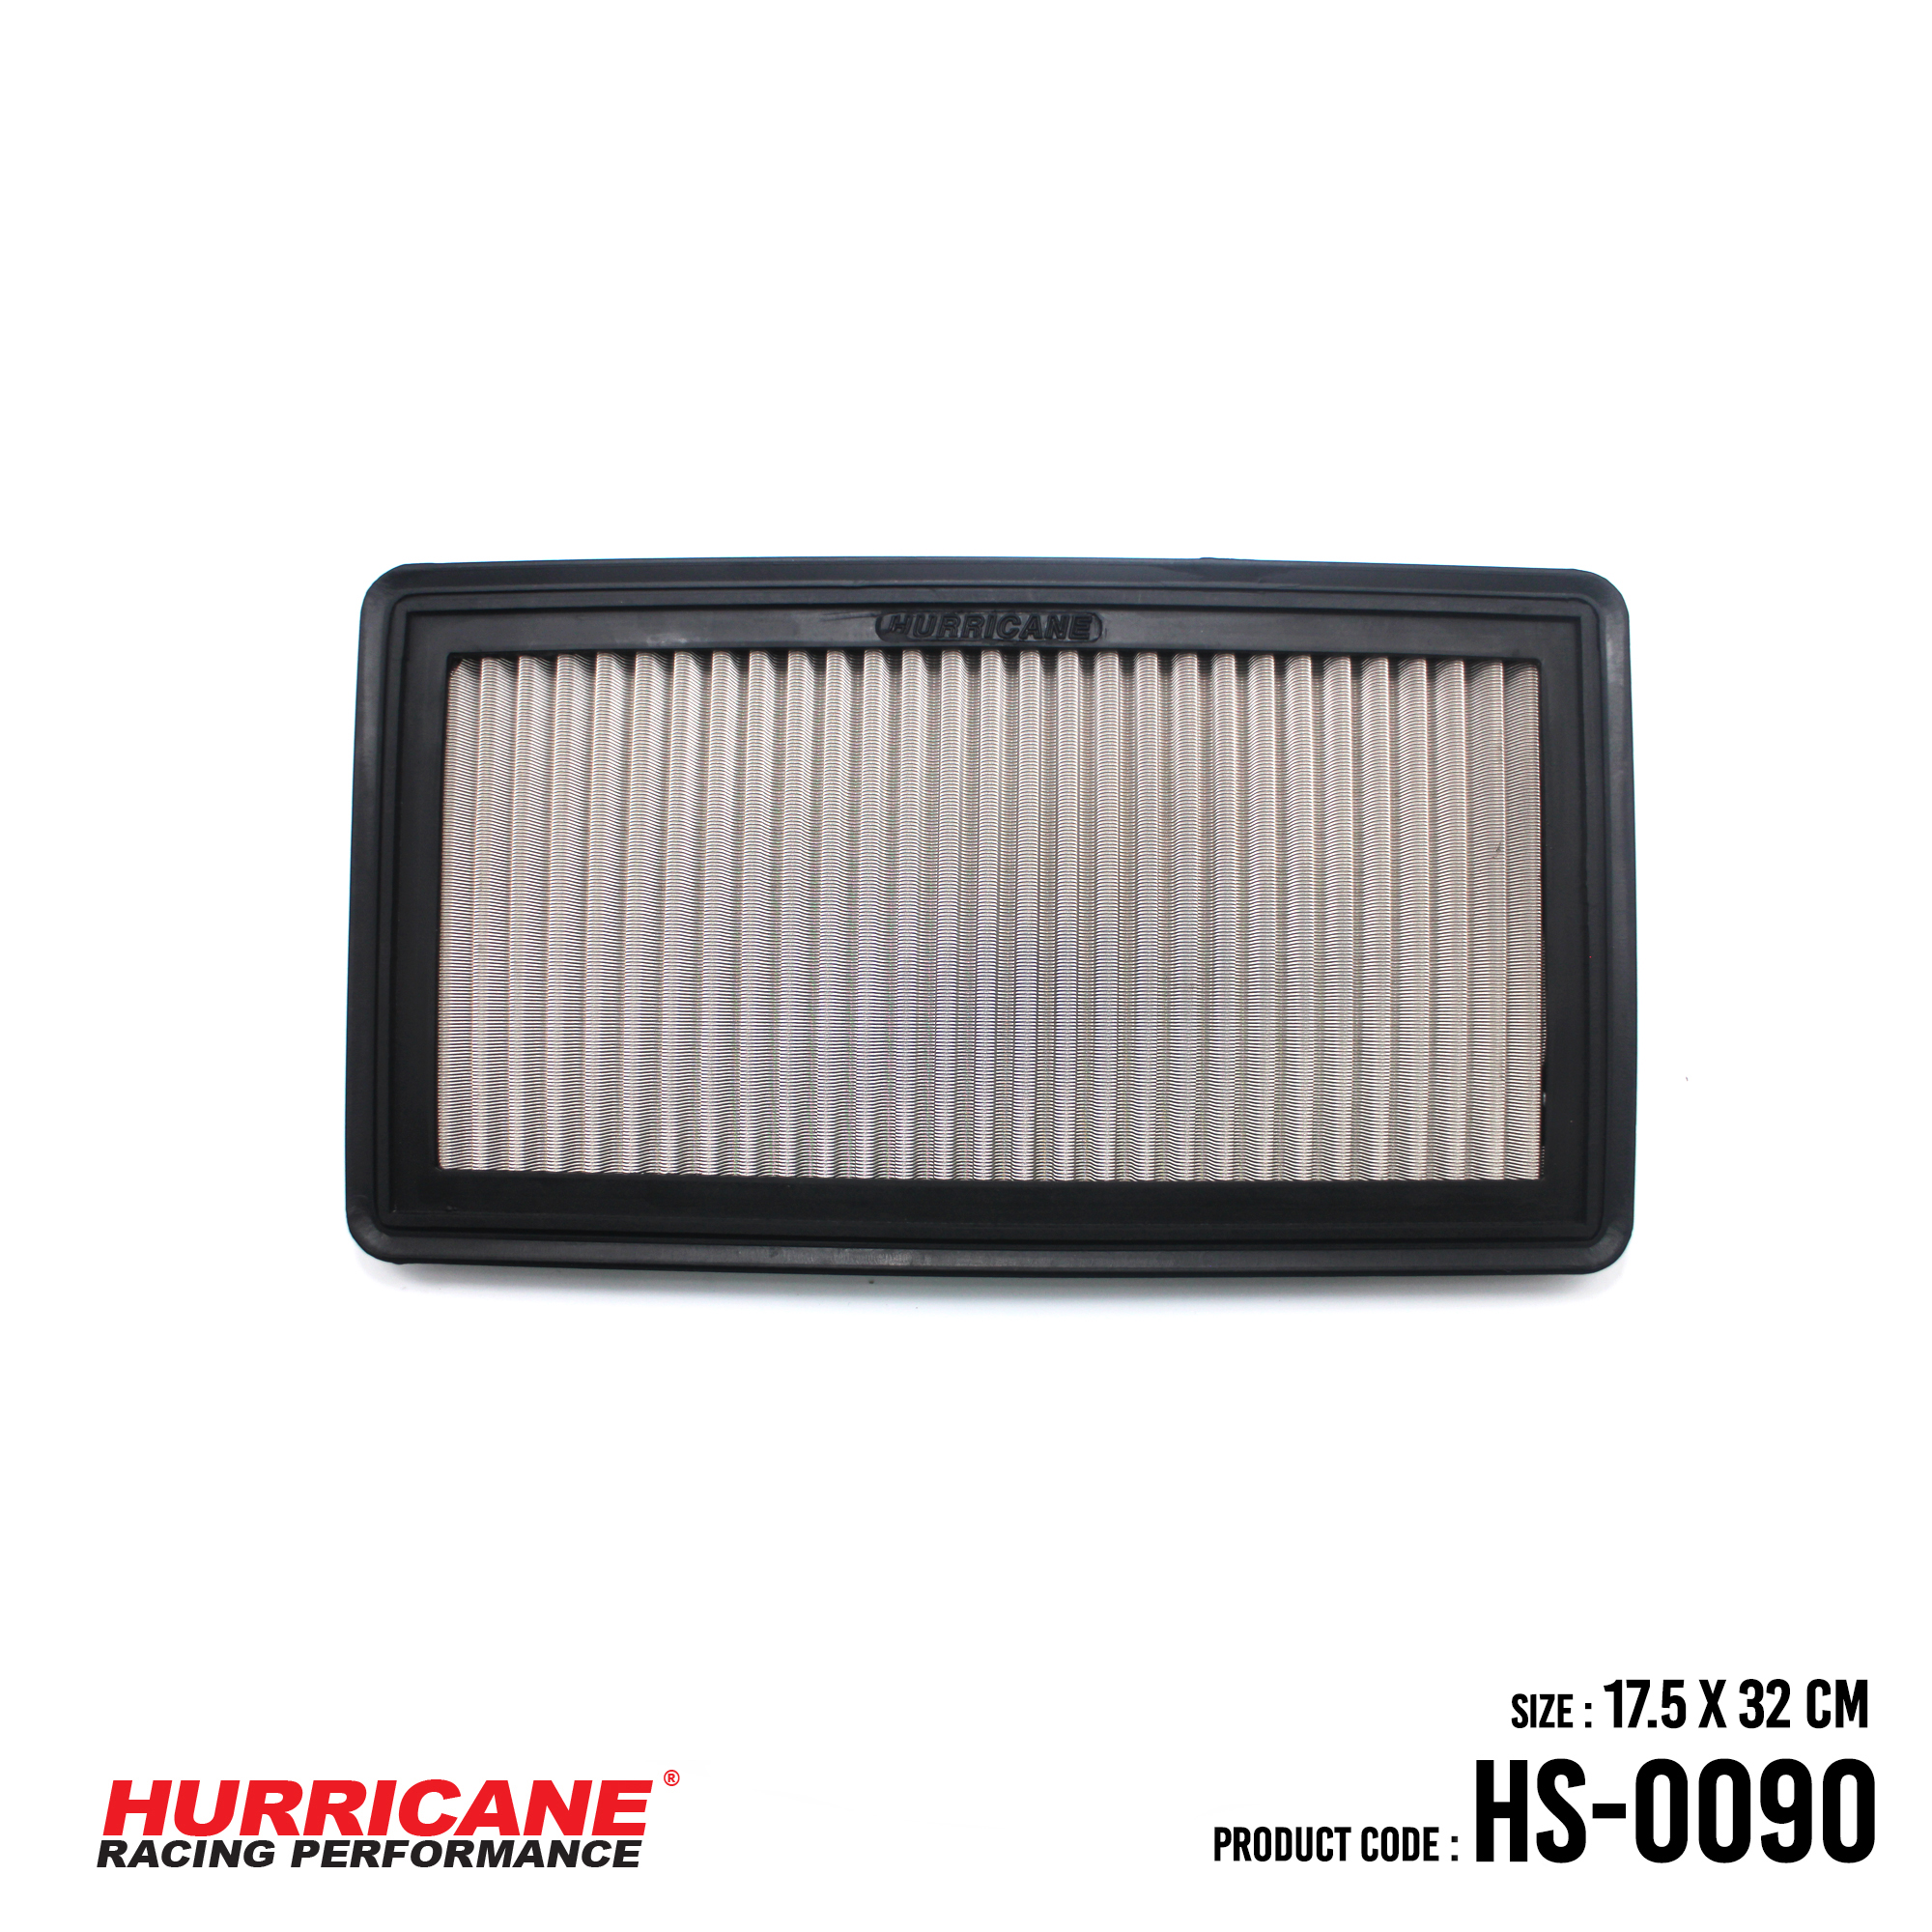 HURRICANE STAINLESS STEEL AIR FILTER FOR HS-0090 Mazda